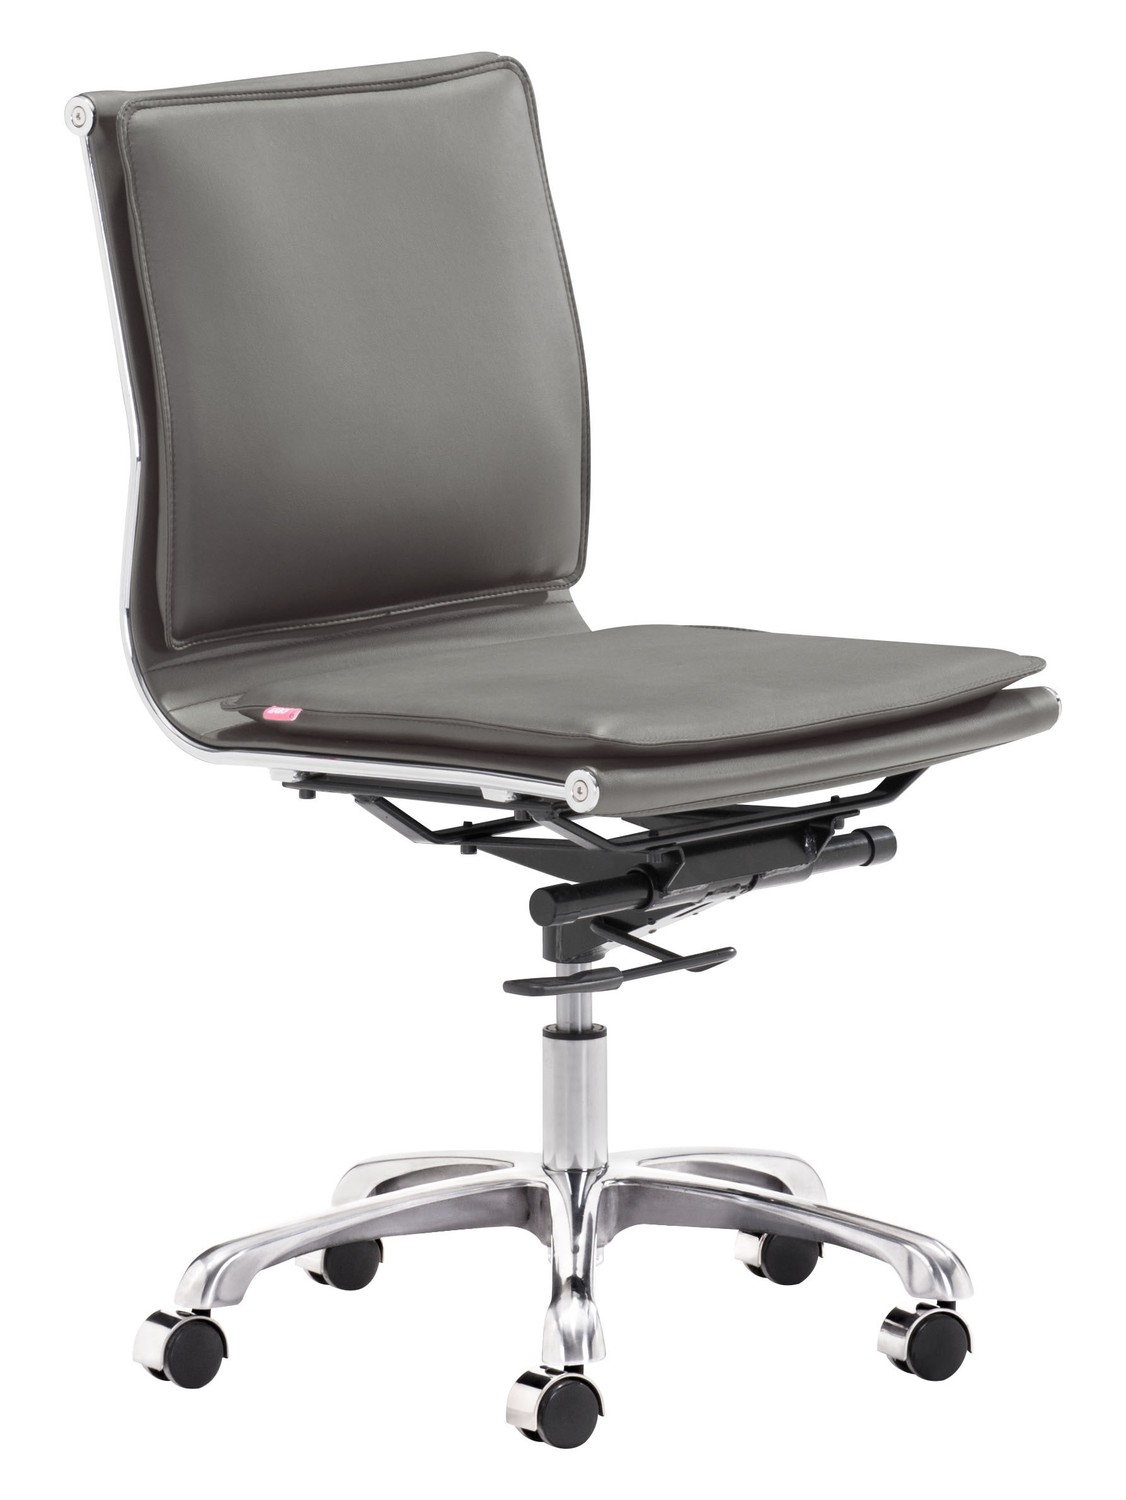 23" x 23" x 36.6" Gray, Leatherette, Chromed Steel, Plus Armless Office Chair